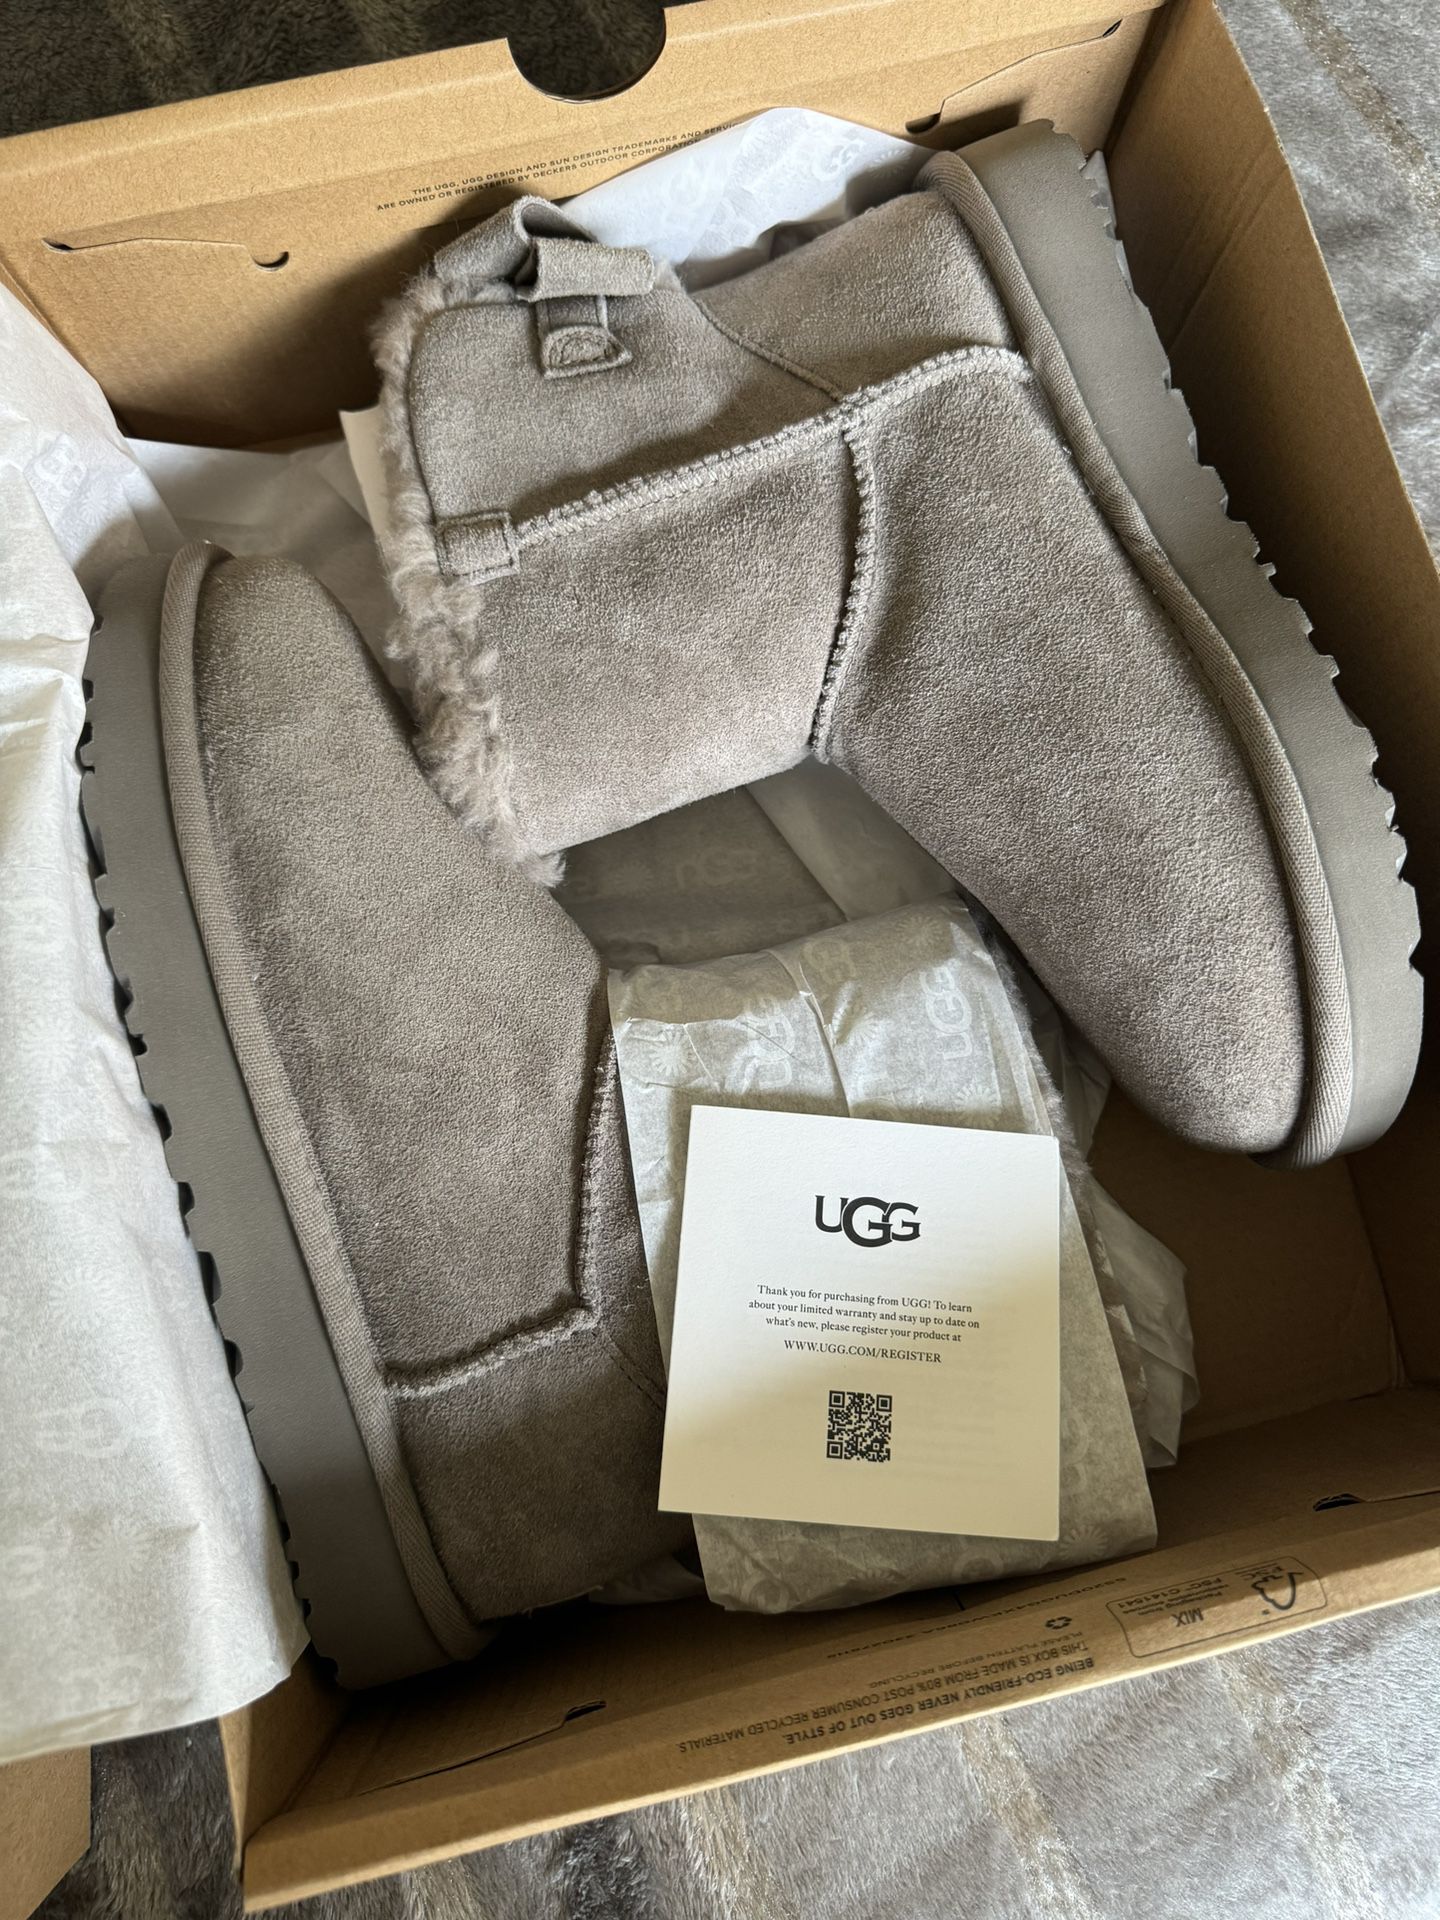 Brand New UGG suede Boots - Price Drops